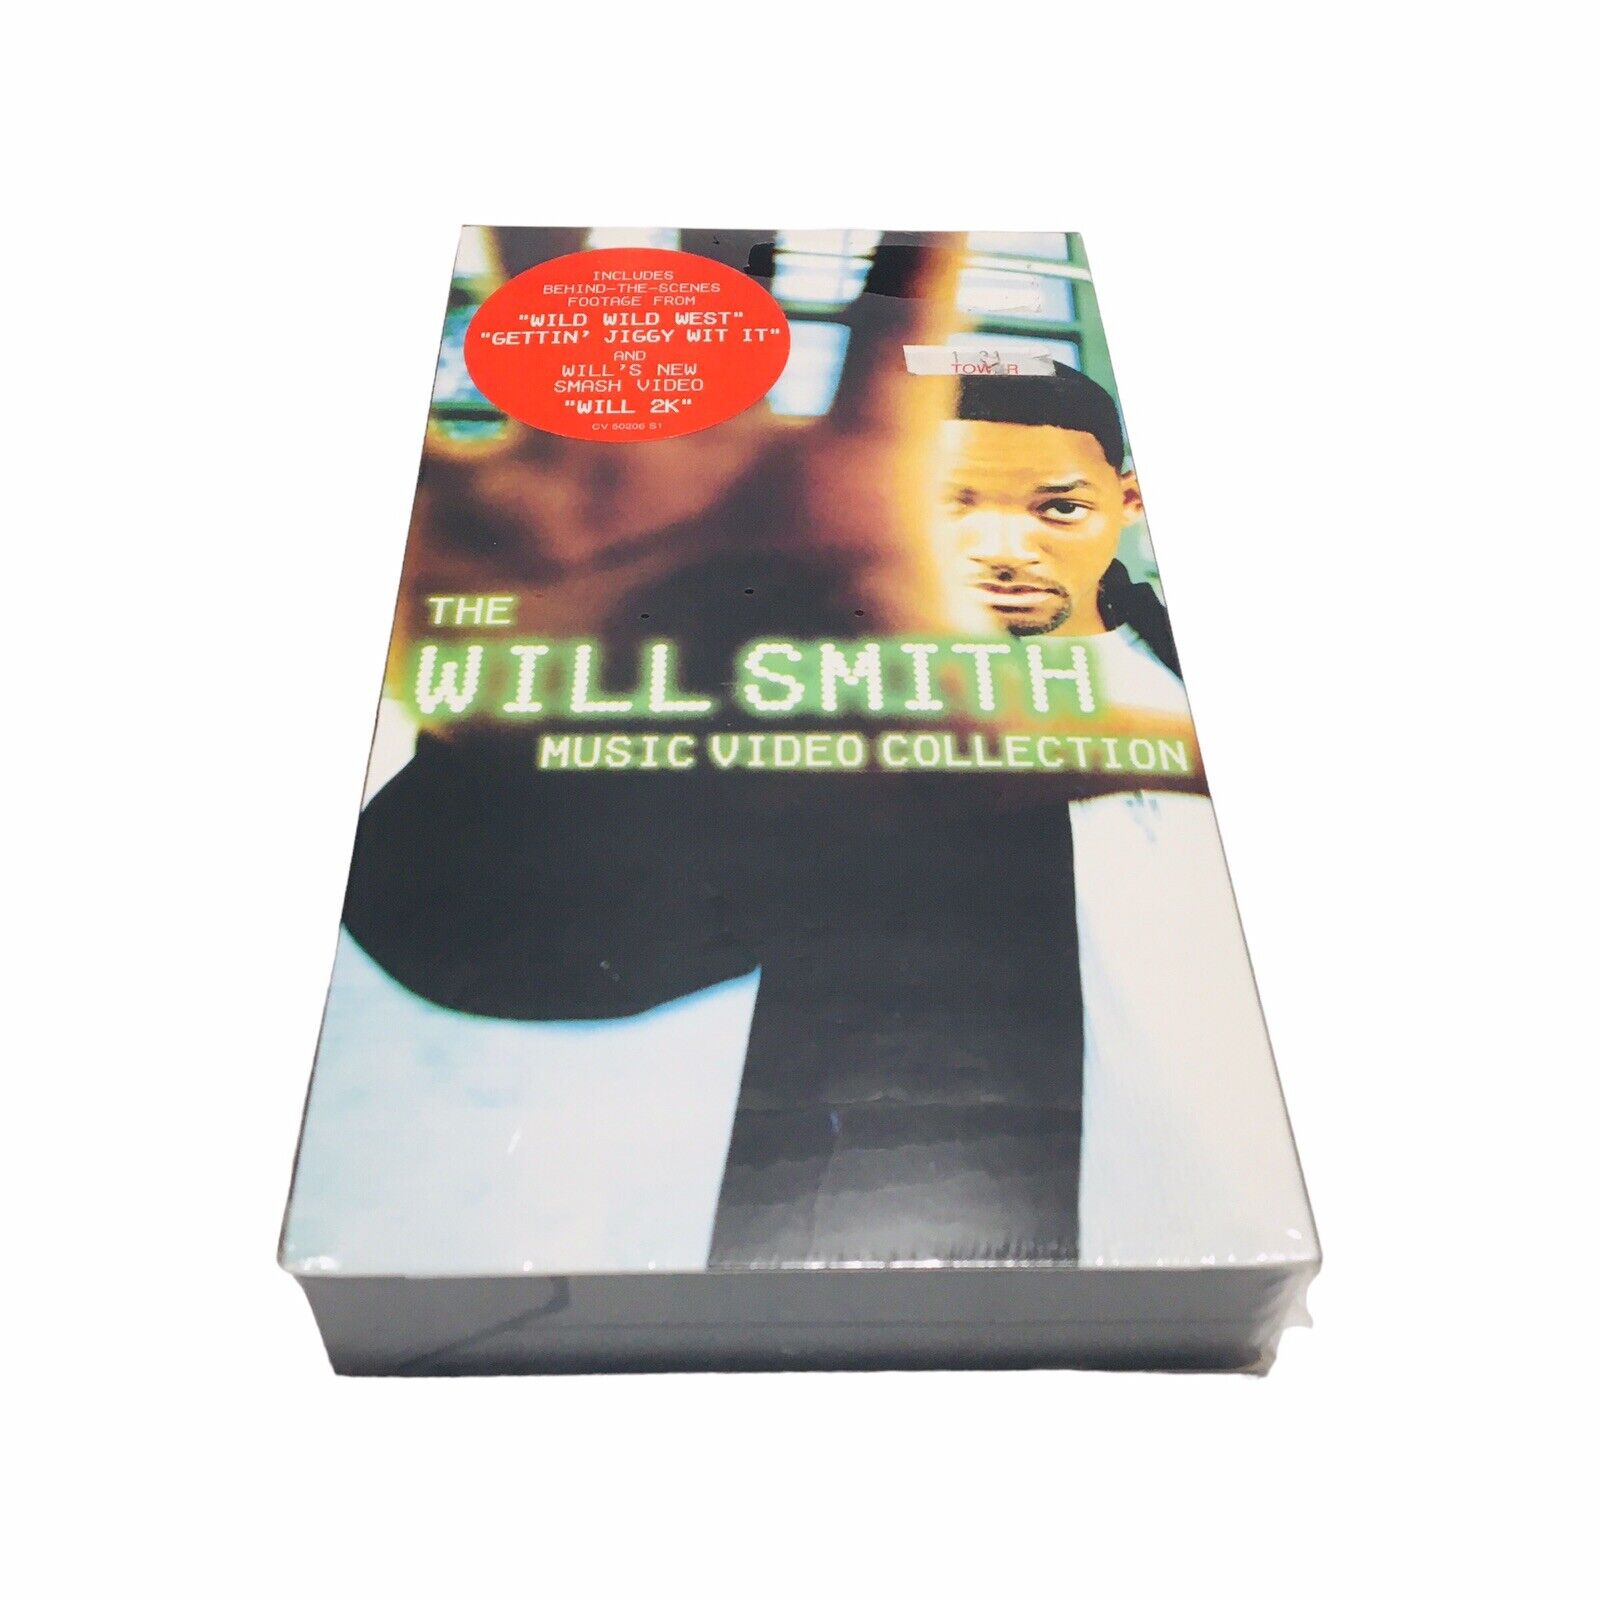 The Will Smith Music Video Collection by Will Smith VHS 1999 Sealed Hype Sticker